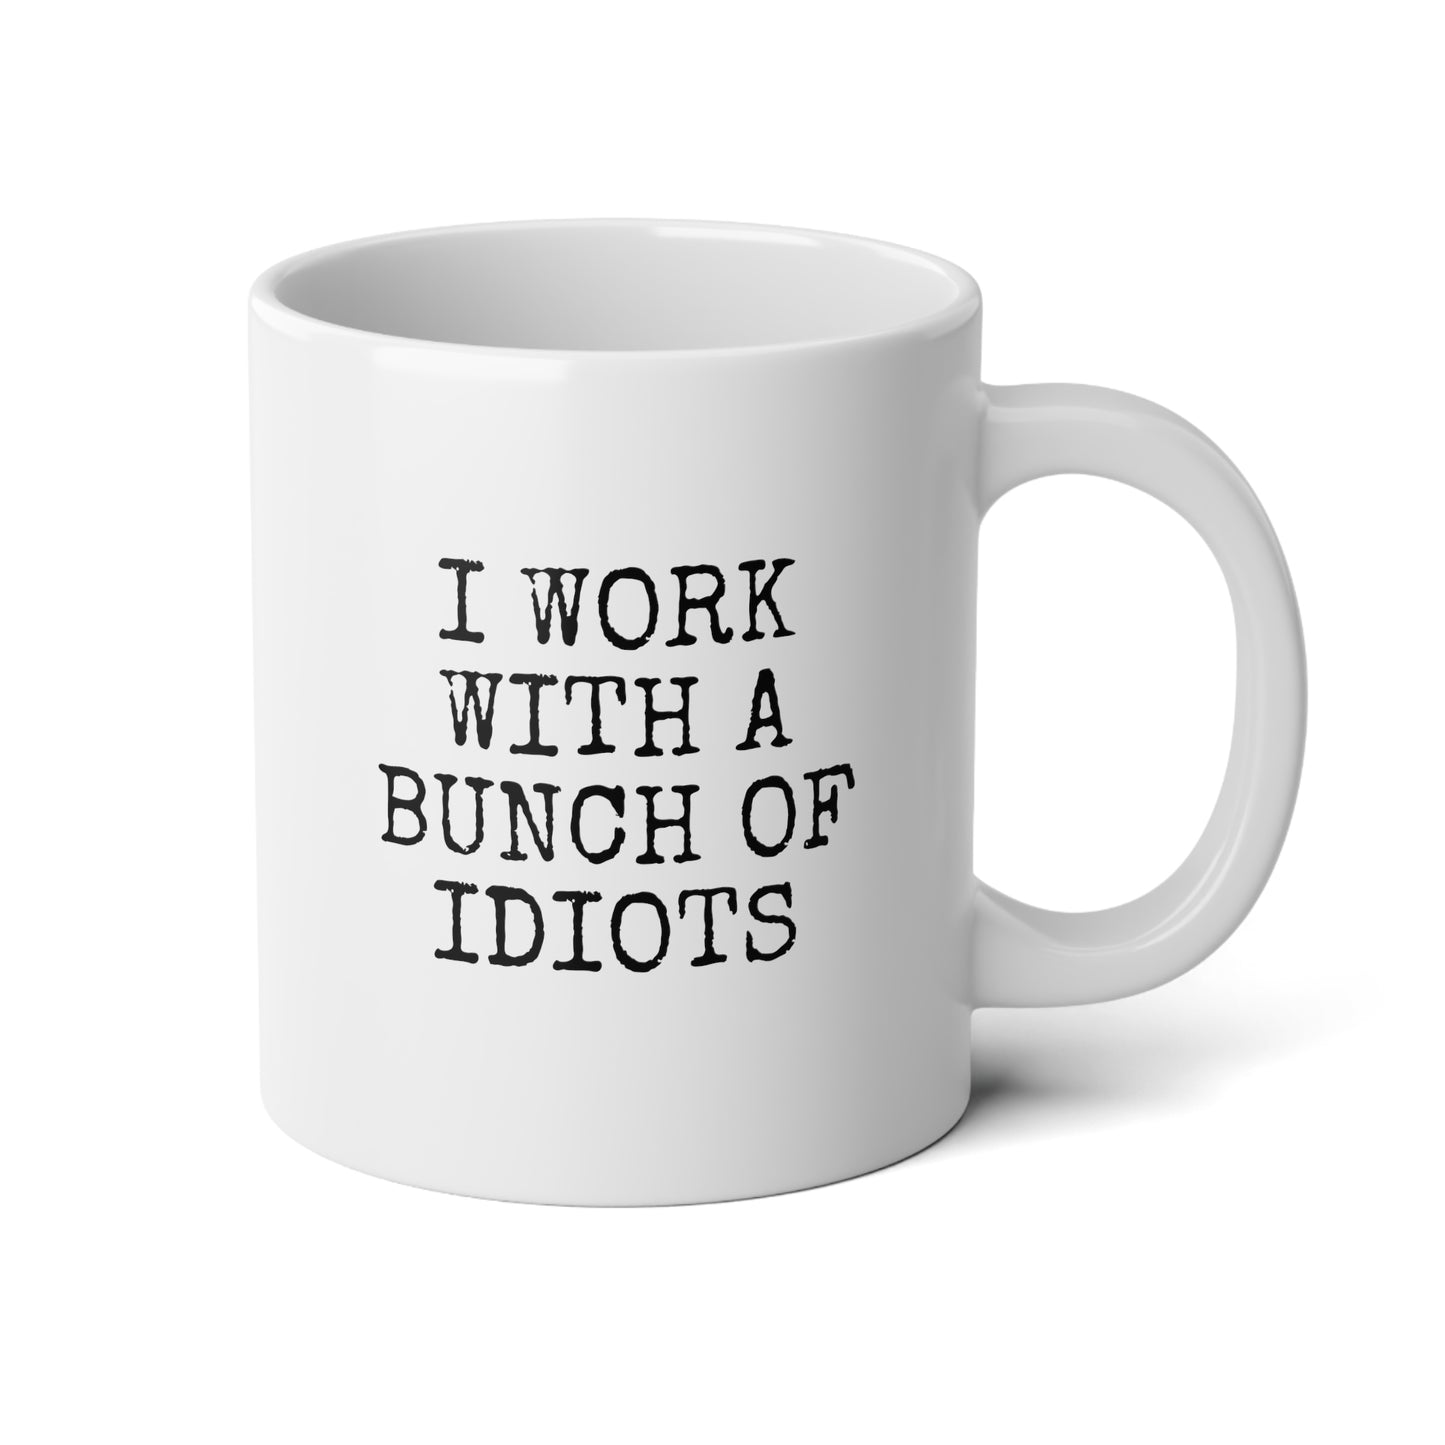 I Work With A Bunch Of Idiots 20oz white funny large coffee mug gift for coworker office humor novelty work joke christmas secret santa present waveywares wavey wares wavywares wavy wares